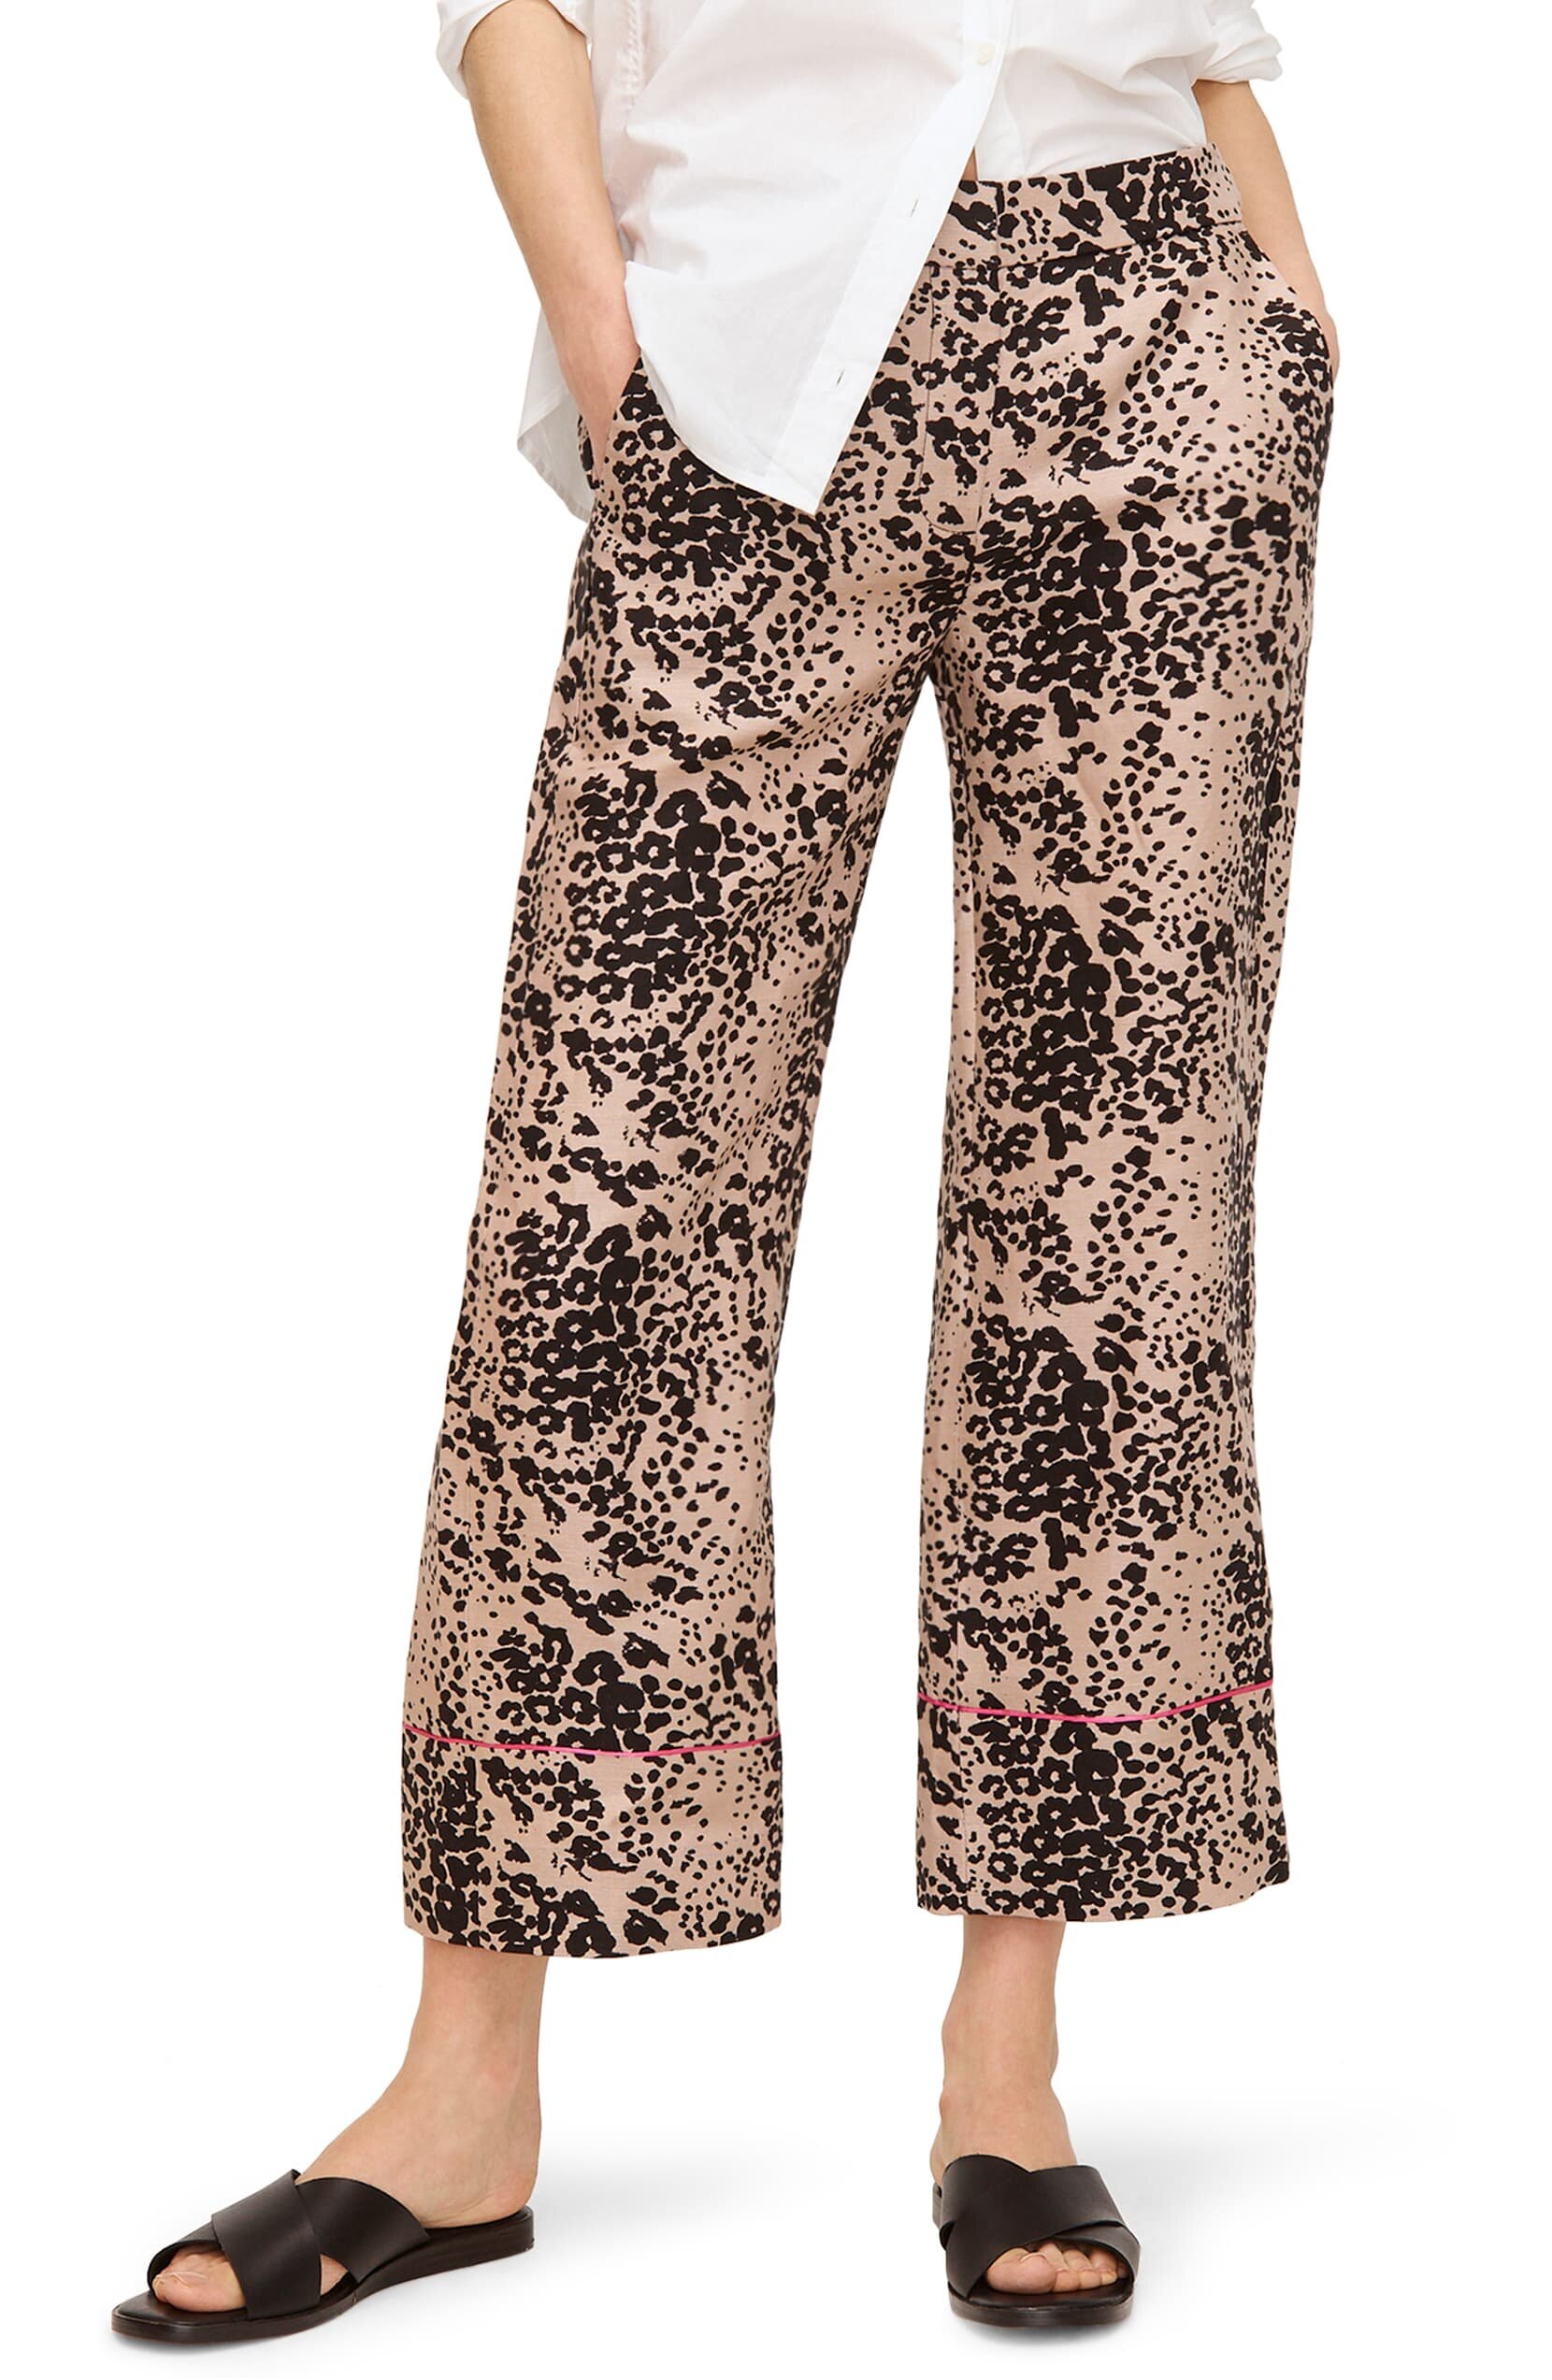 Wrinkle resistant animal print pants are your new everyday favs